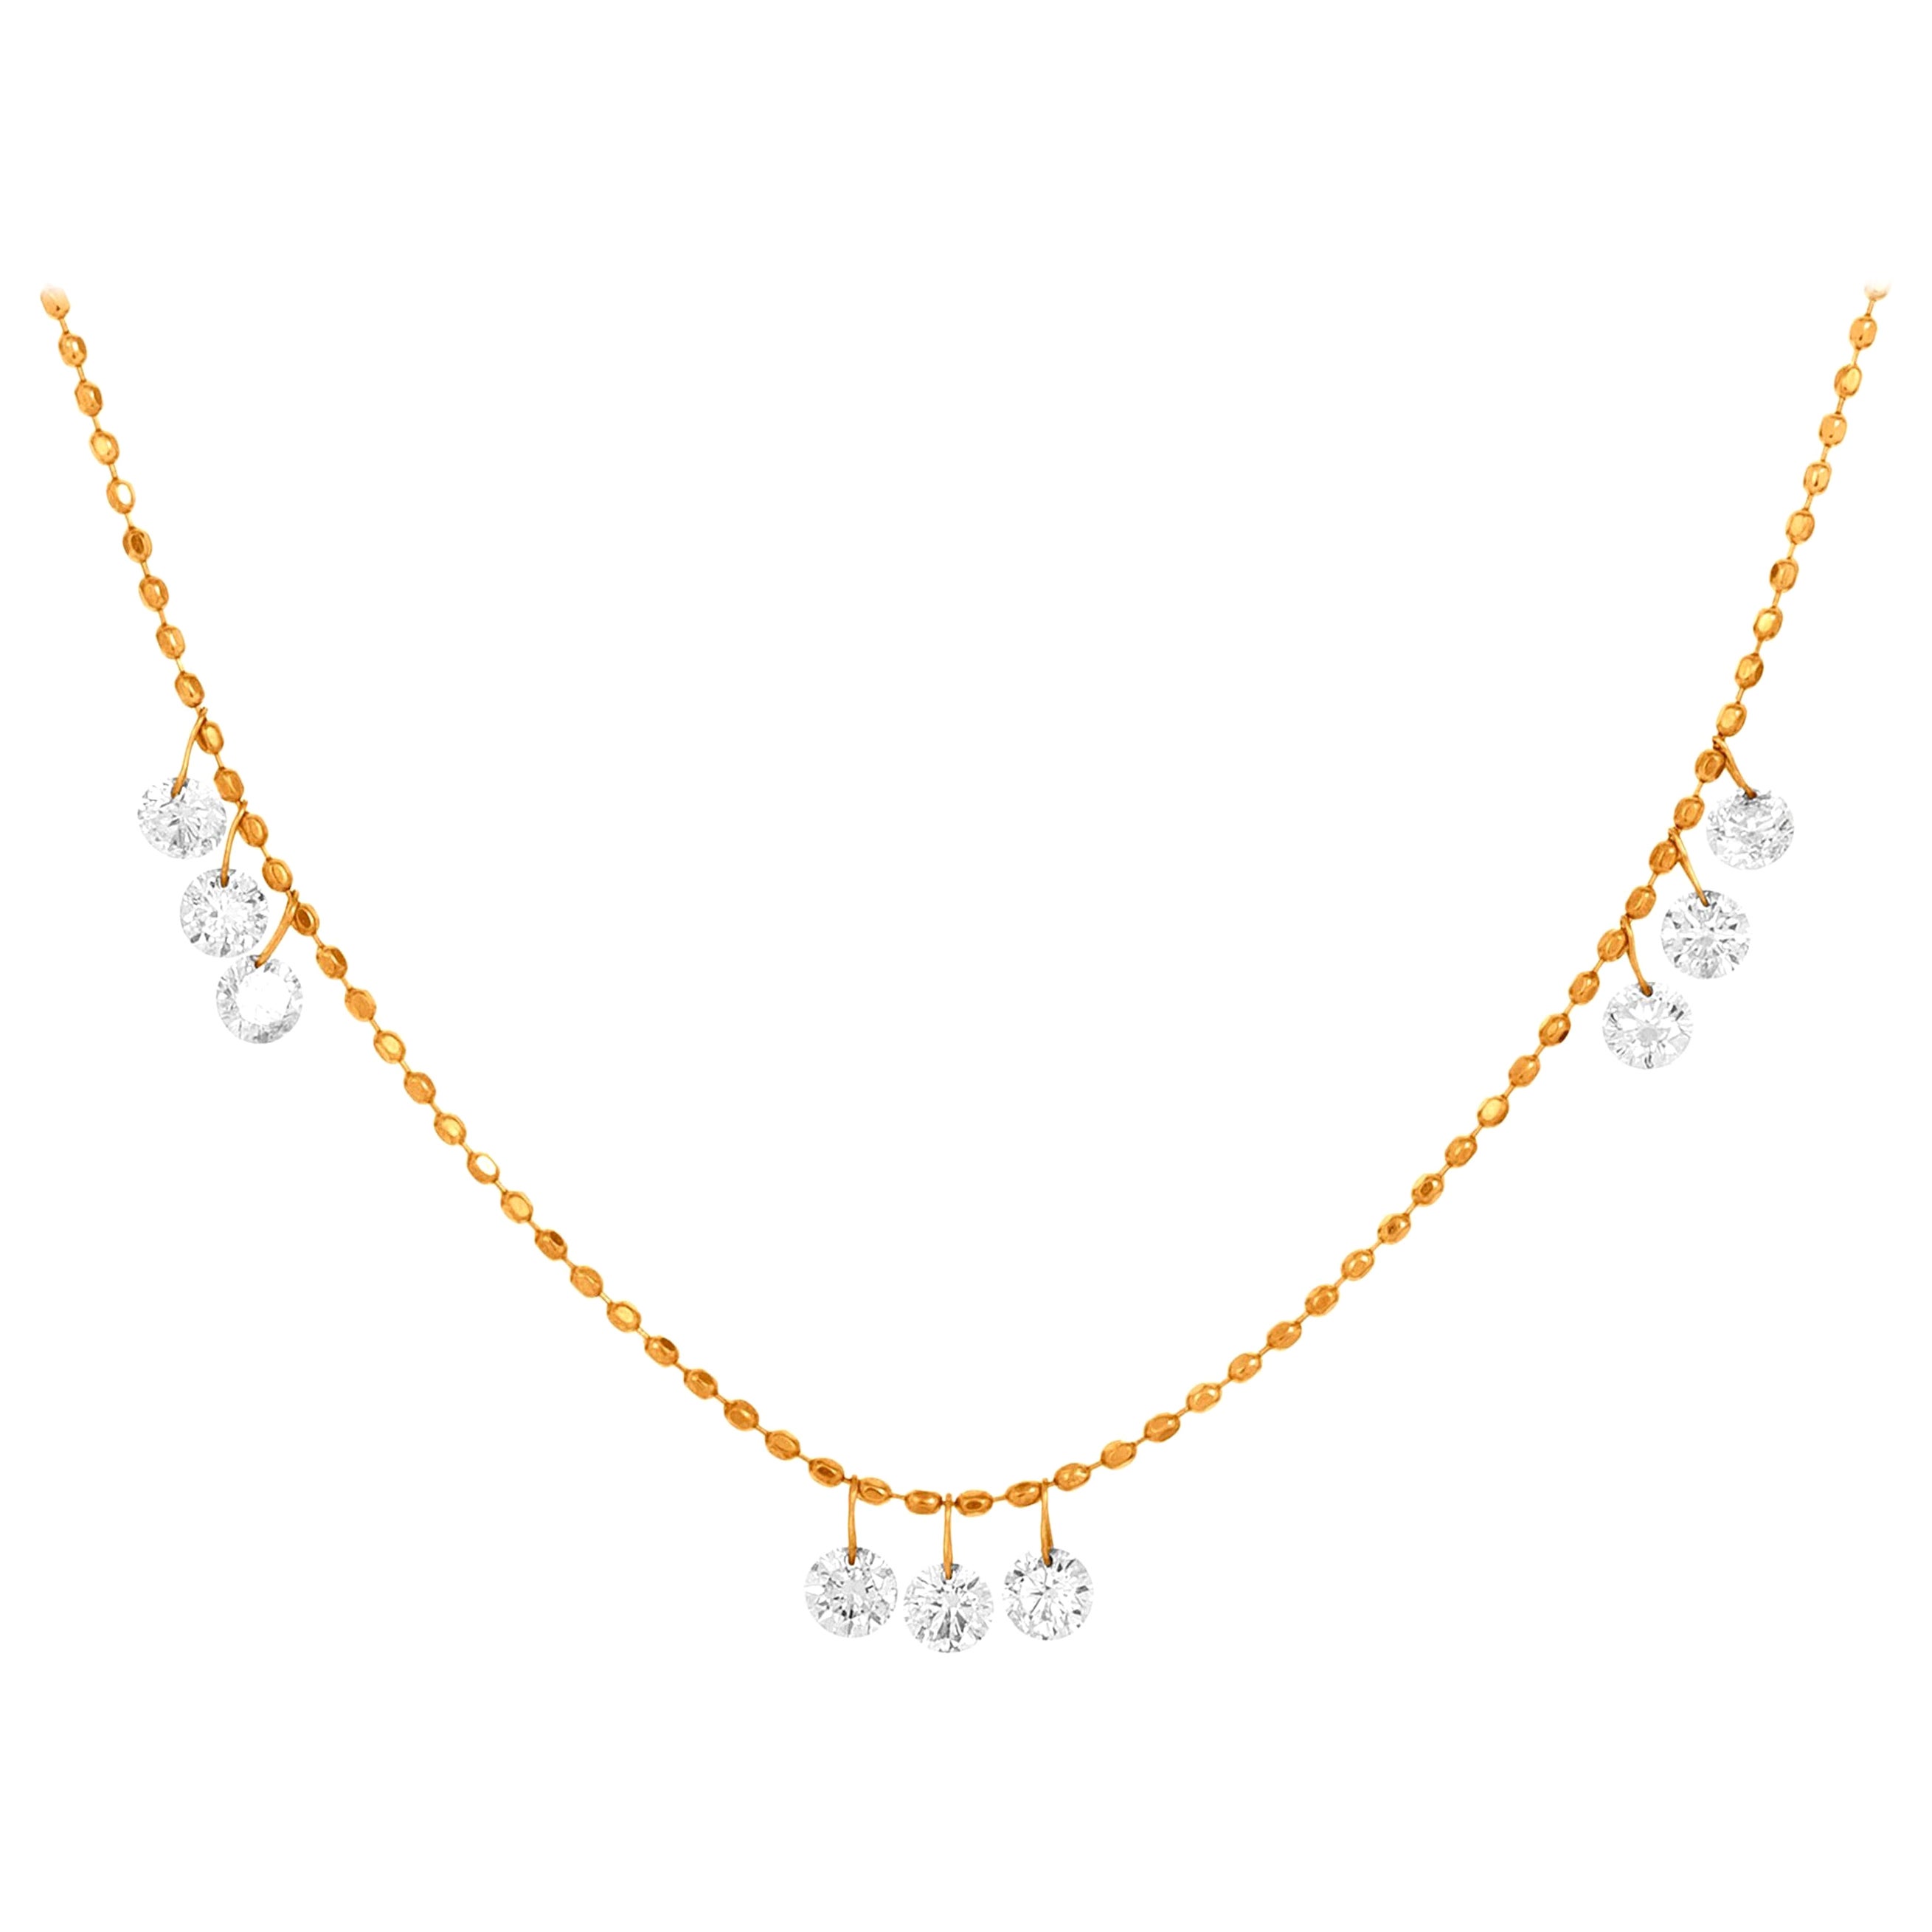 Luxle 0.5 Cts. Drill Diamond Frontal Necklace in 18 Karat Yellow Gold For Sale